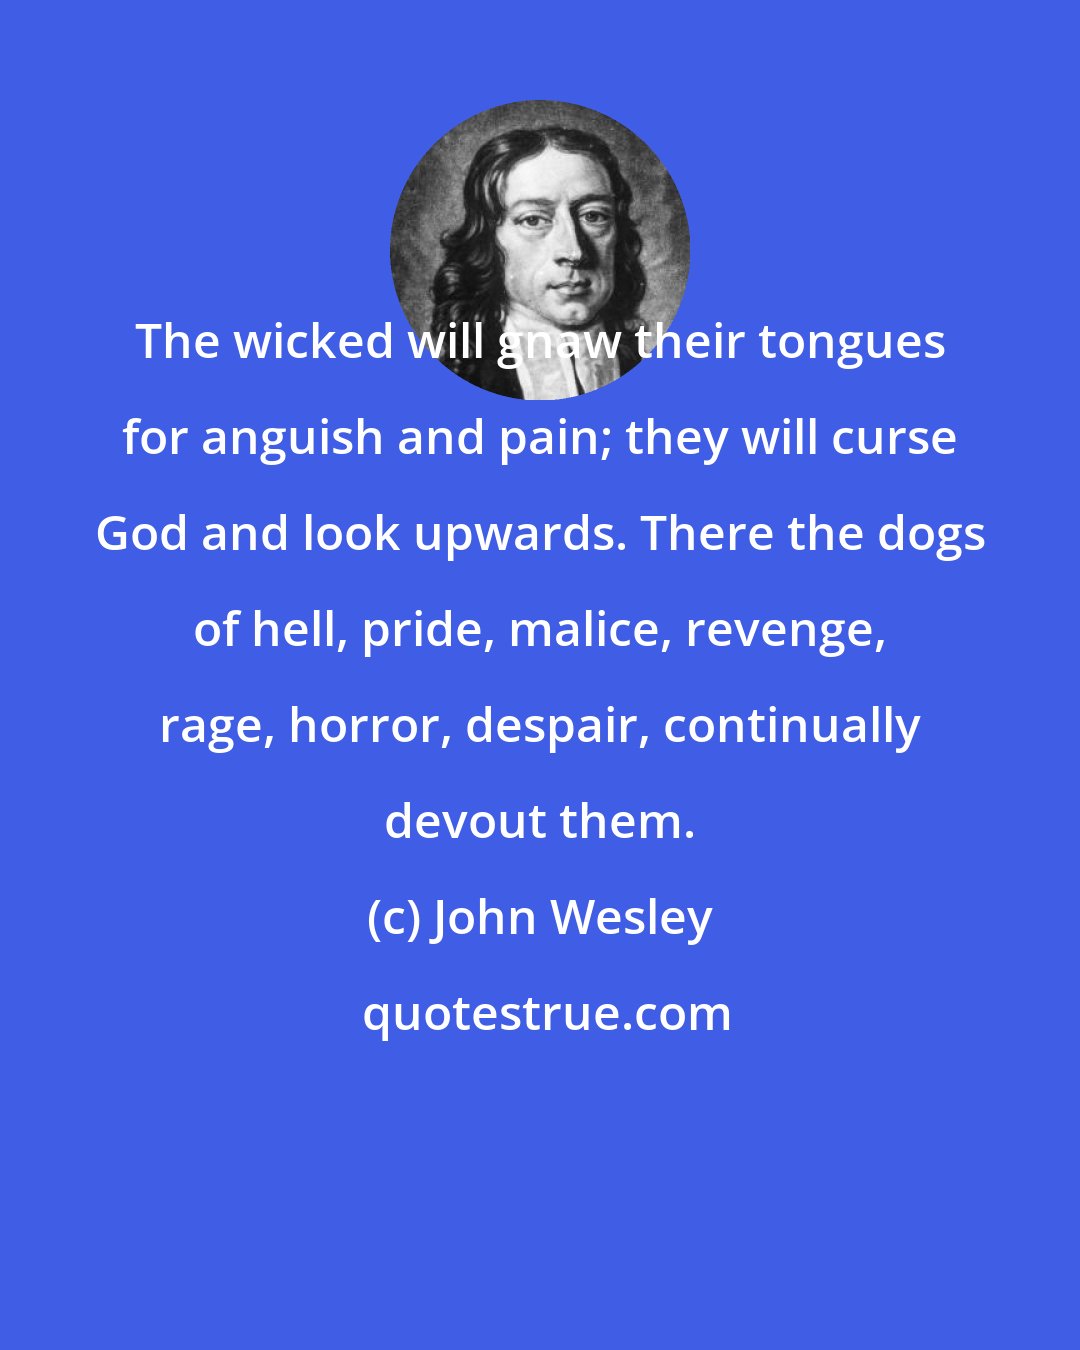 John Wesley: The wicked will gnaw their tongues for anguish and pain; they will curse God and look upwards. There the dogs of hell, pride, malice, revenge, rage, horror, despair, continually devout them.